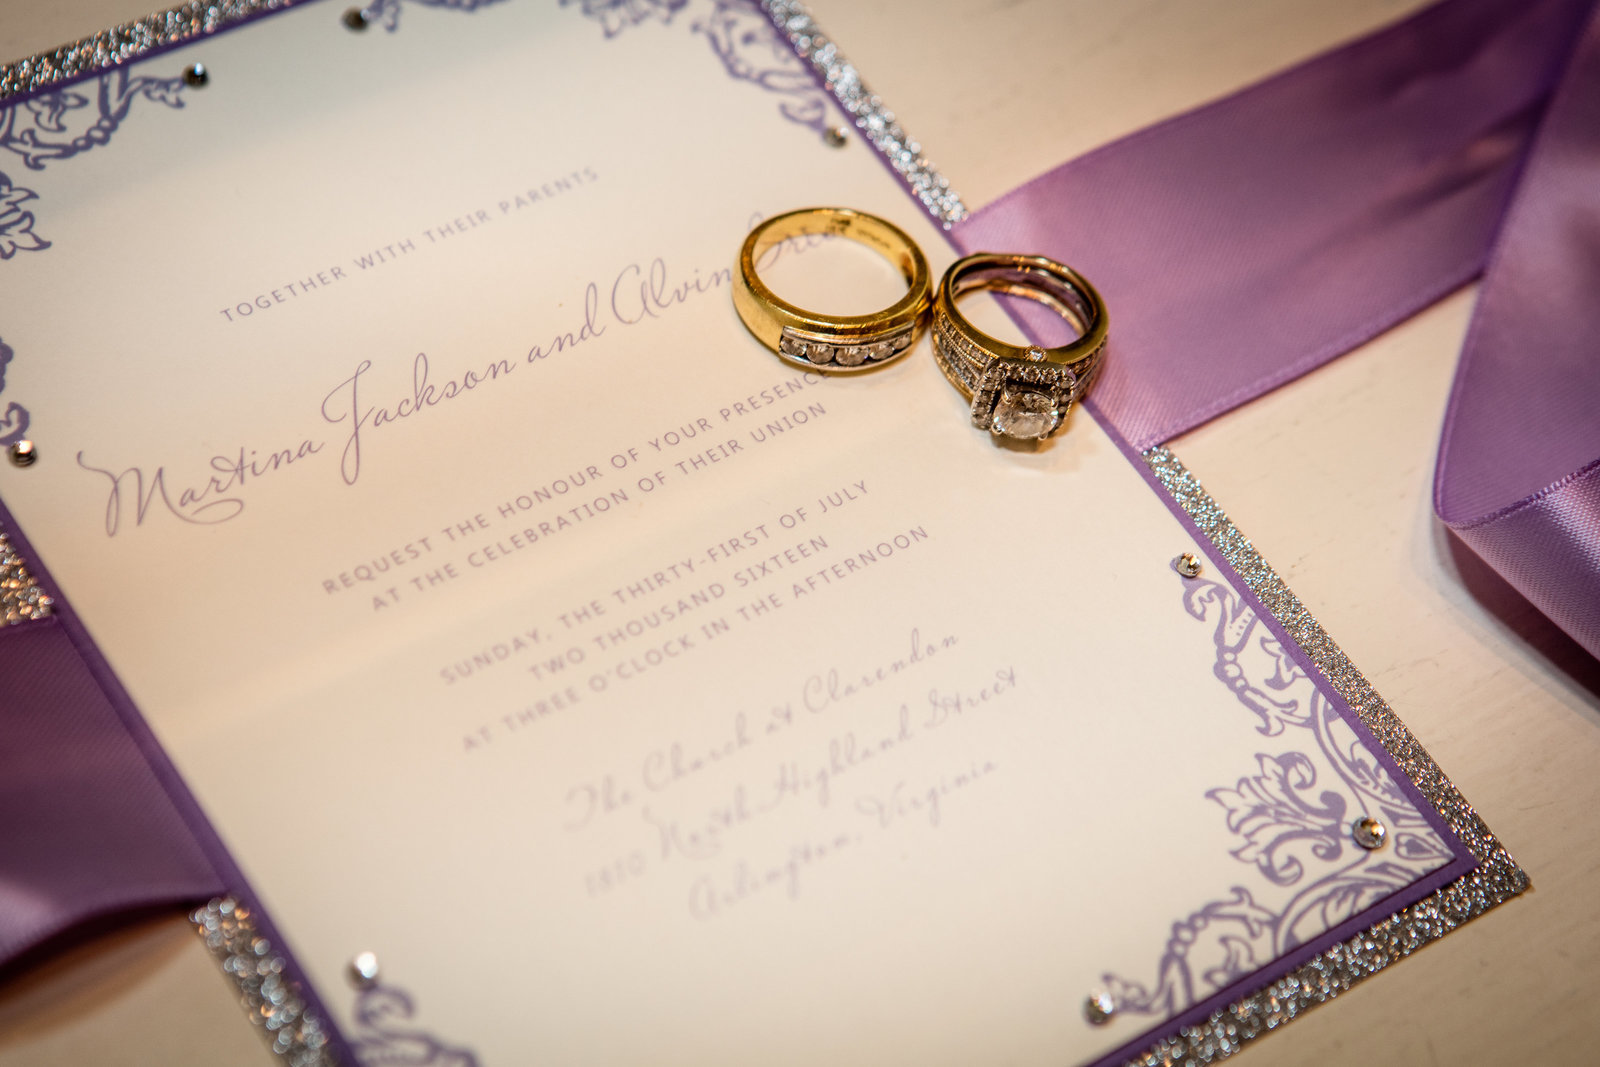 bling and sparkle wedding invitation with sash